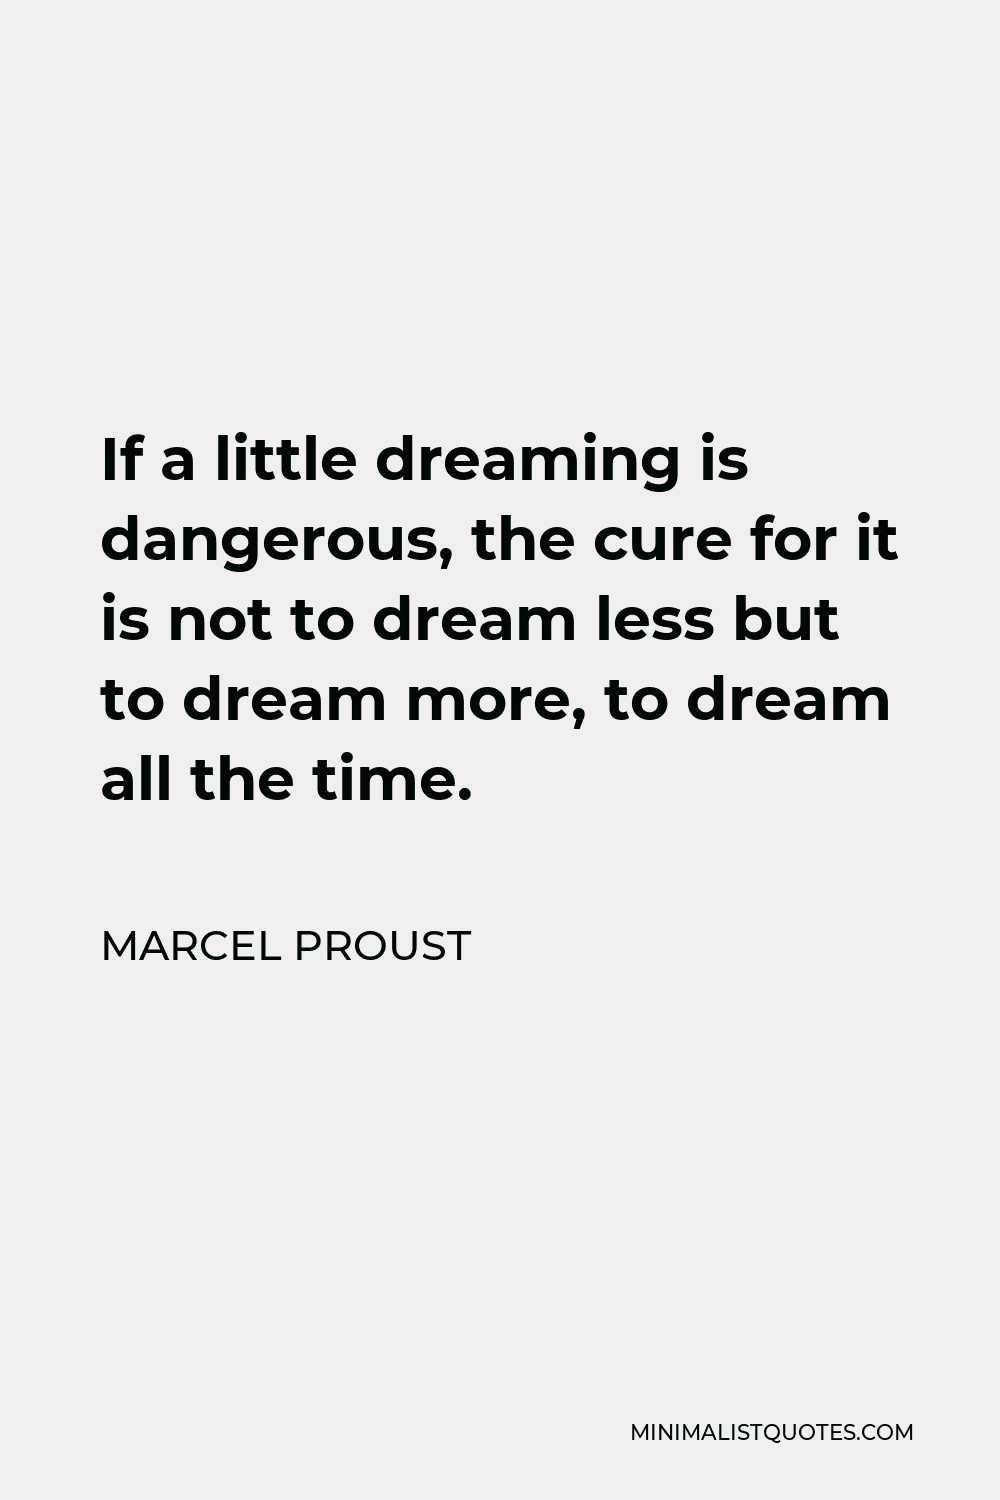 Marcel Proust Quote - If a little dreaming is dangerous, the cure for it is not to dream less but to dream more, to dream all the time.